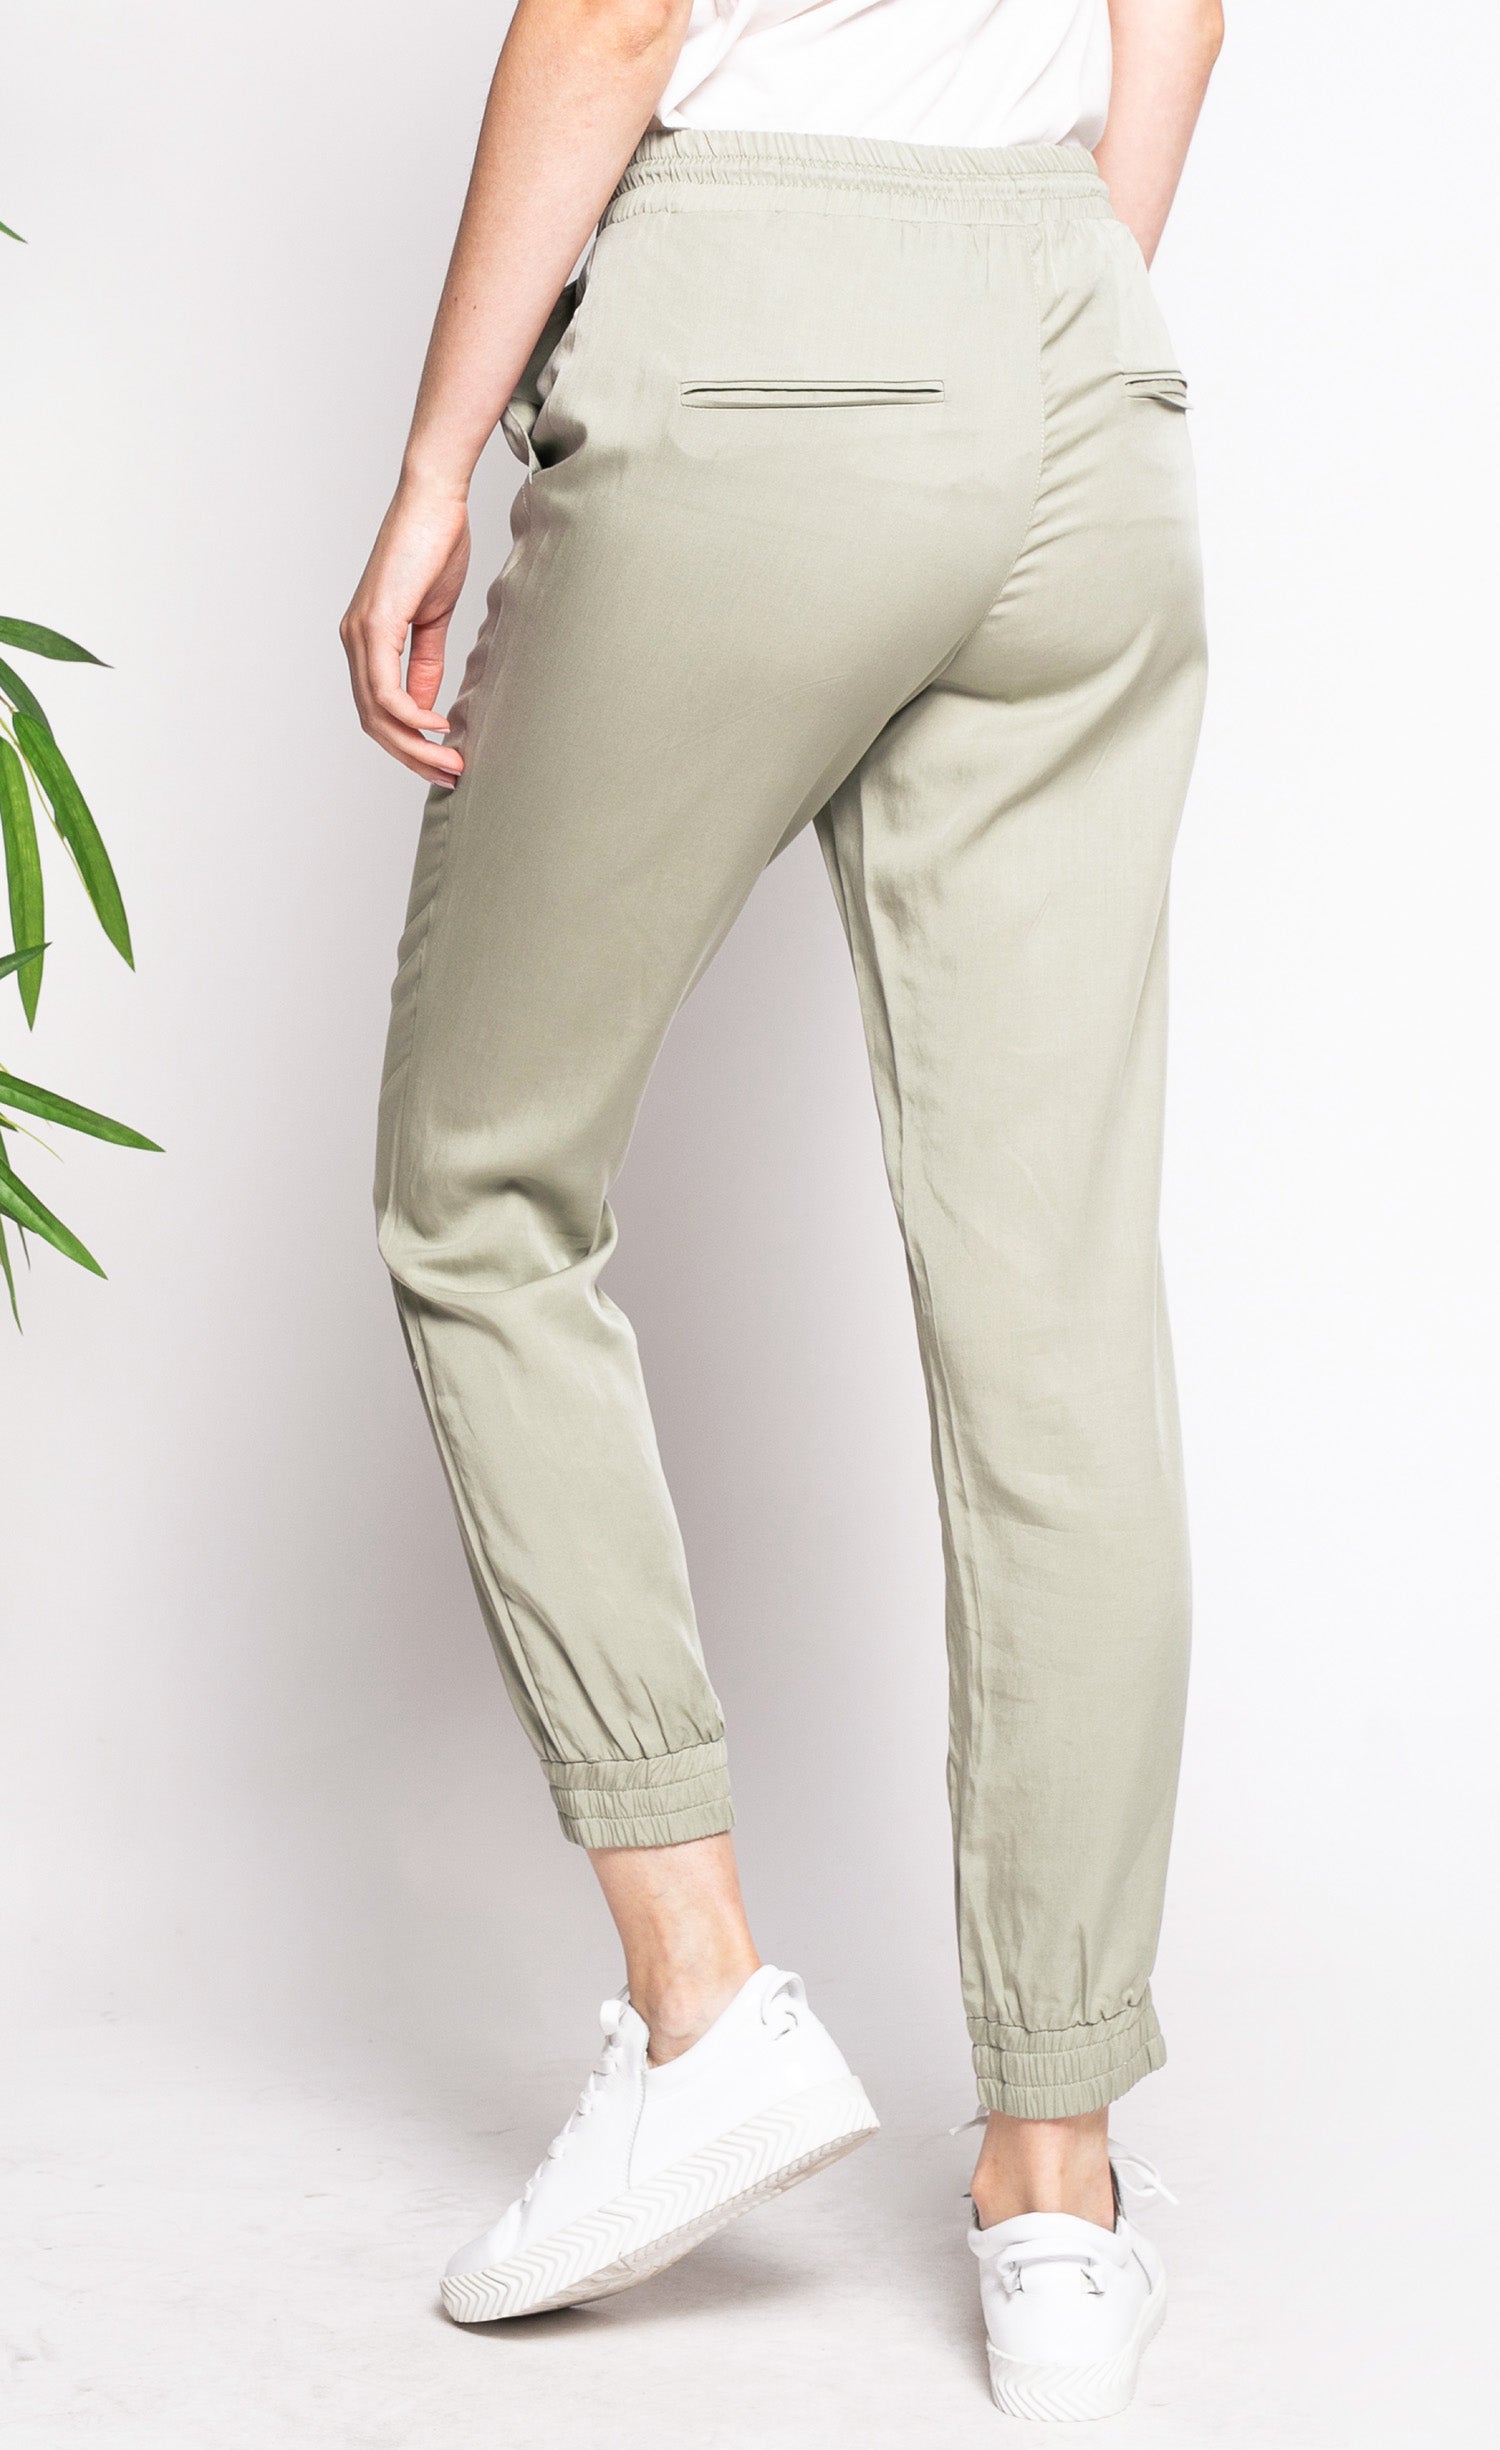 The Allegra Pants - Pink Martini Collection